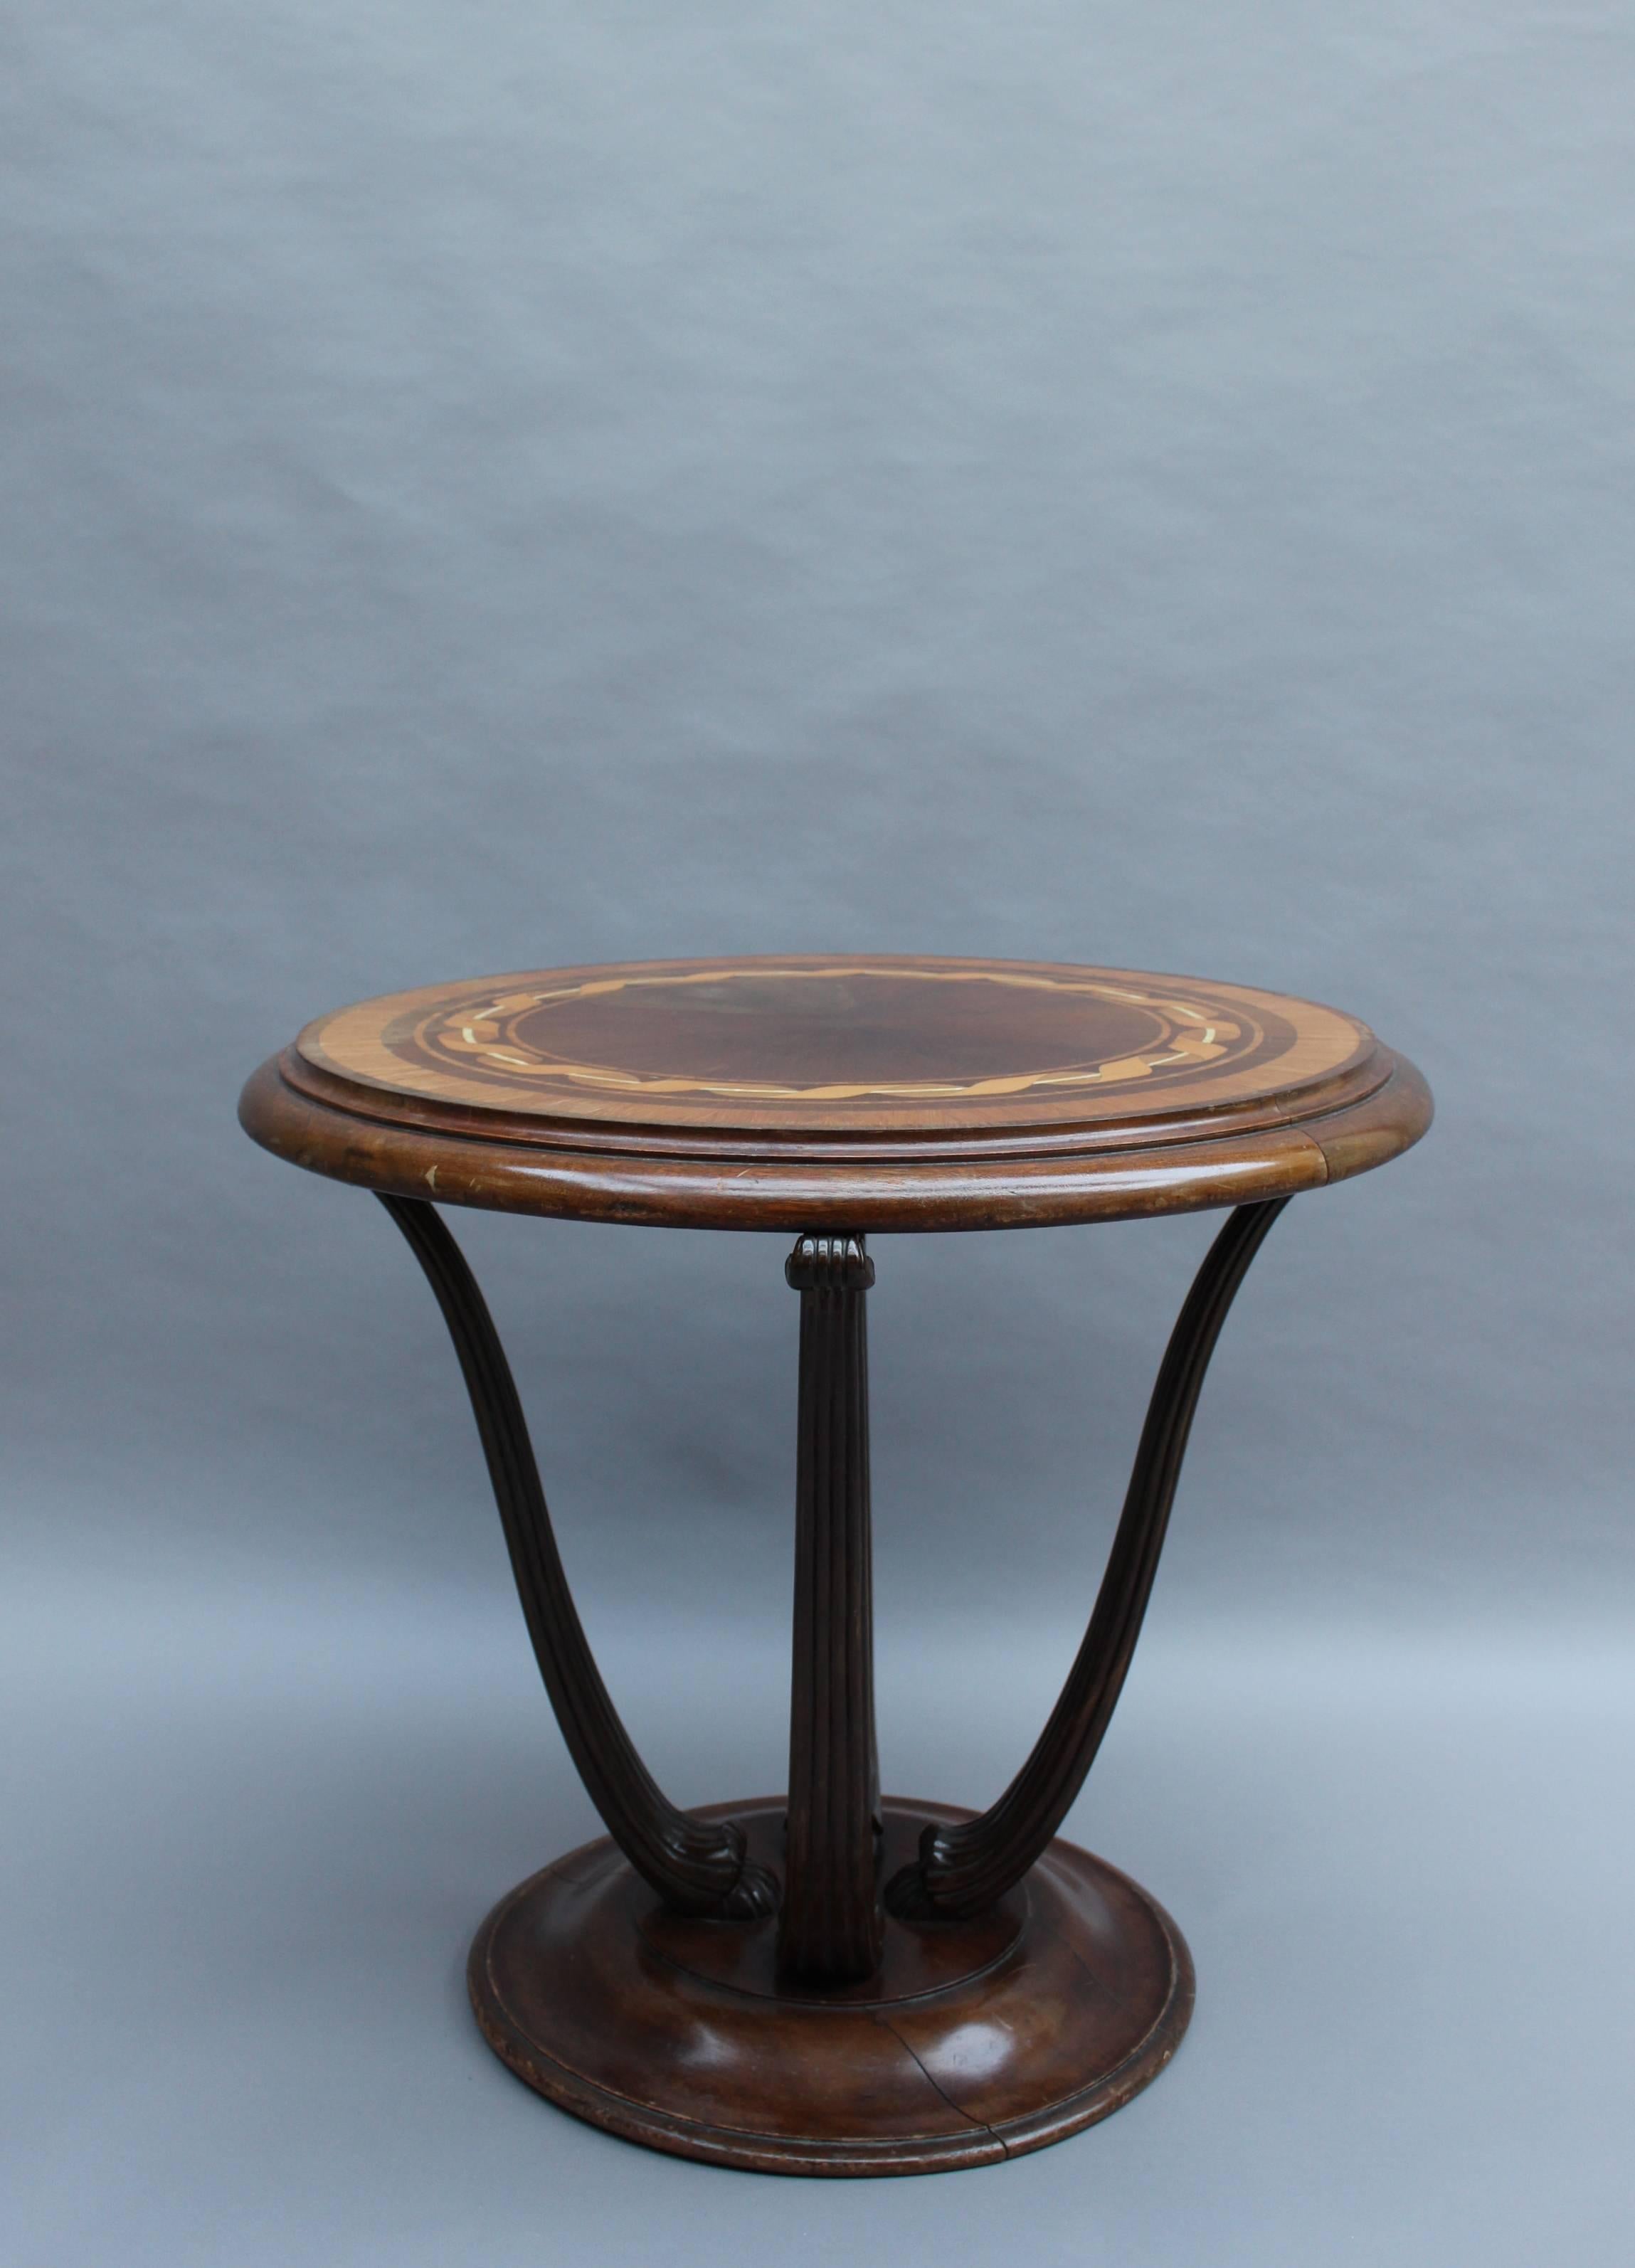 Fine French Art Deco gueridon or center table with four fluted legs and a marquetry top by Atelier Ernest Schmitt.
